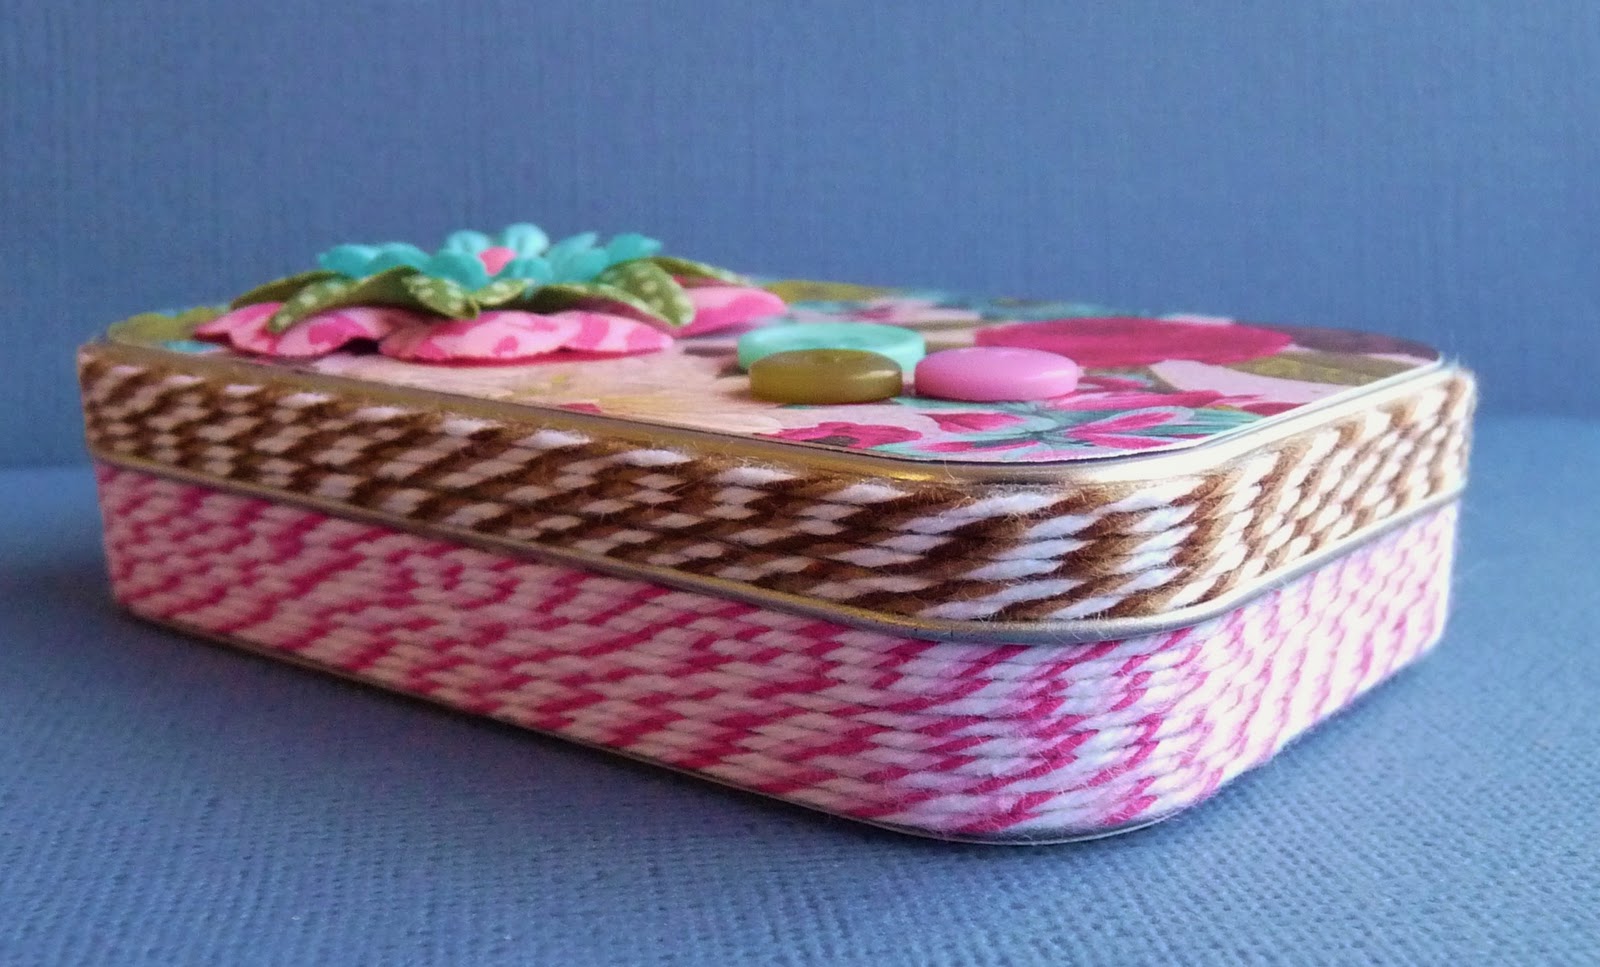 , Cupcake  cupcake is my tins recipient's twine color pink vintage favorite since